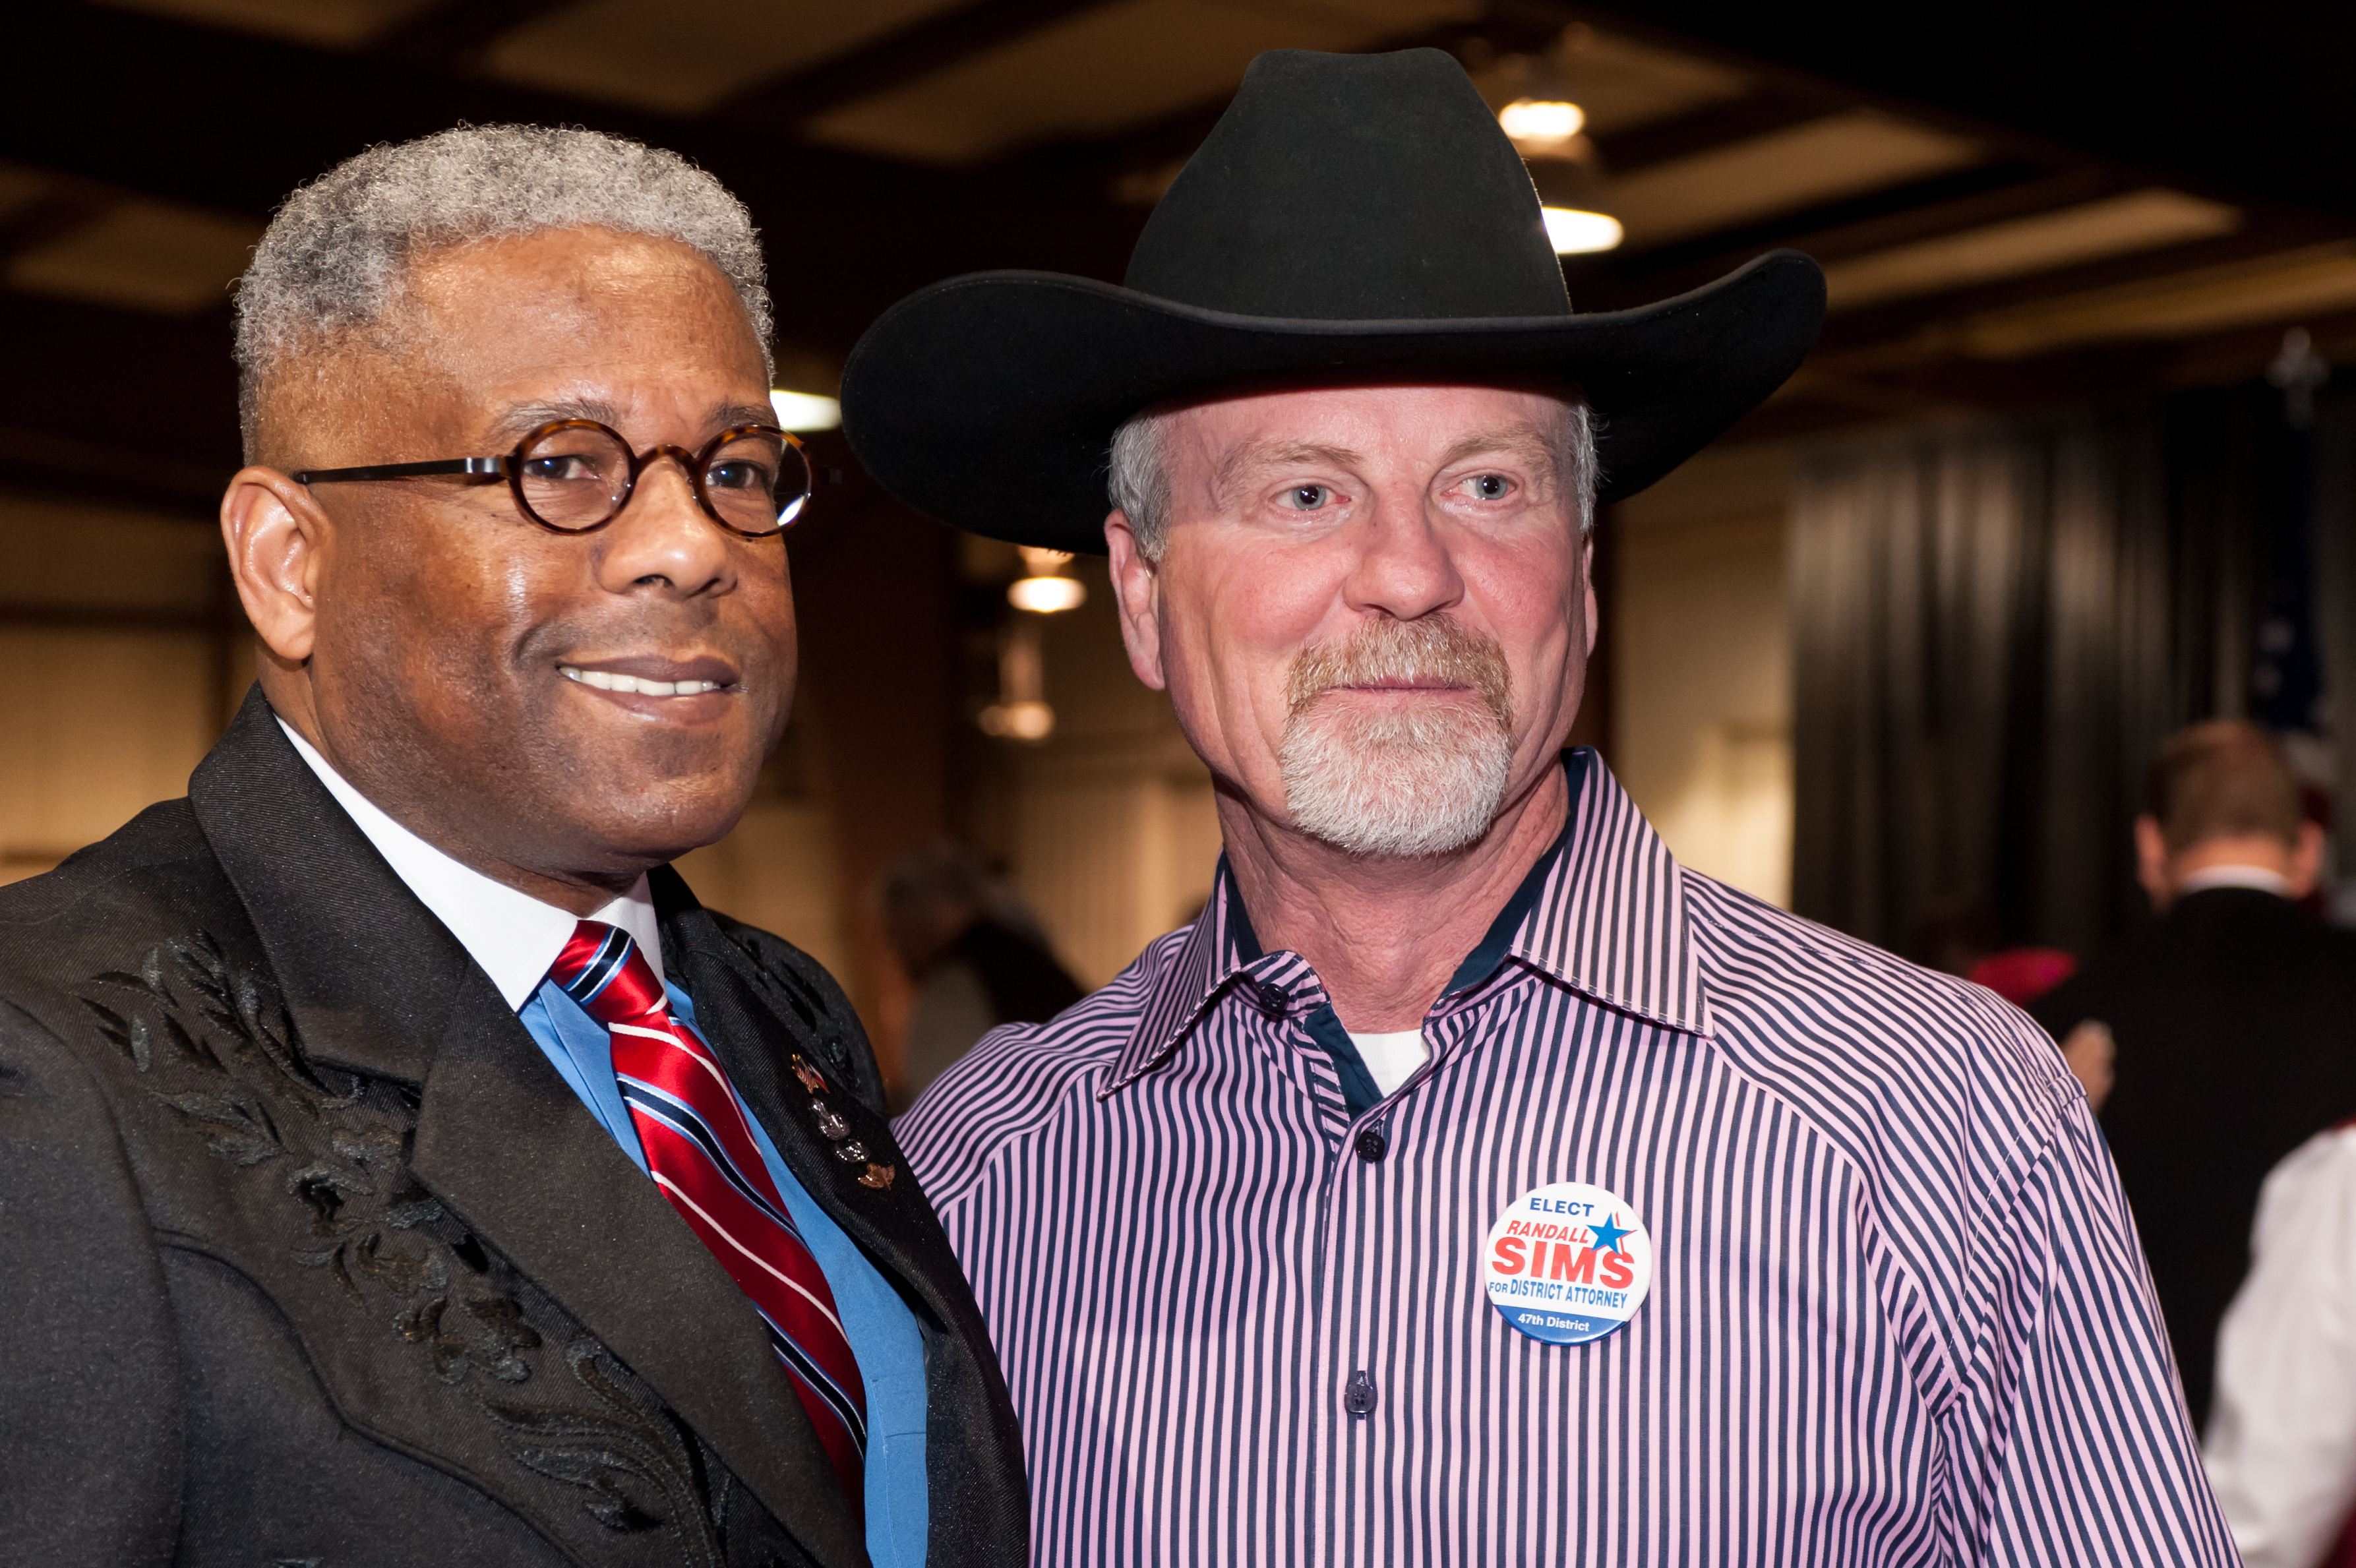 Shaie Williams for AGN Media. Lt. Colonel Allen B West with Randall Sims at the Texas Panhandle Lincoln-Reagan Day Dinner hosted by the local Republican party groups held at The Rex Baxter Building in Amarillo, TX on January 29, 2016